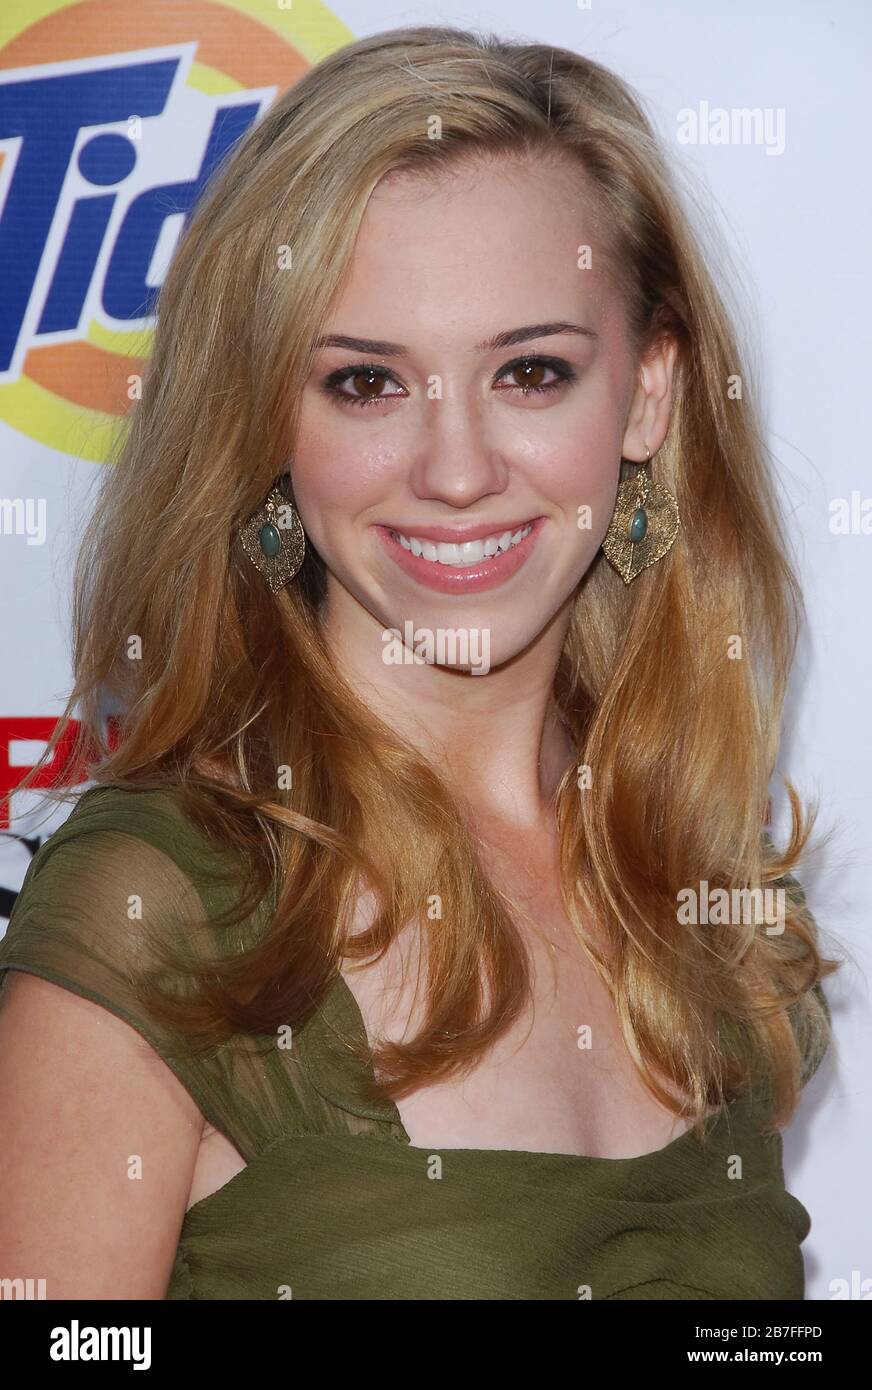 Andrea Bowen at the Desperate Housewives: Extra Juicy Edition Season 2 DVD Launch Event at Wisteria Lane on the Universal Studios Hollywood Back Lot in Universal City, CA. The event took place on Saturday, August 5, 2006.  Photo by: SBM / PictureLux Stock Photo